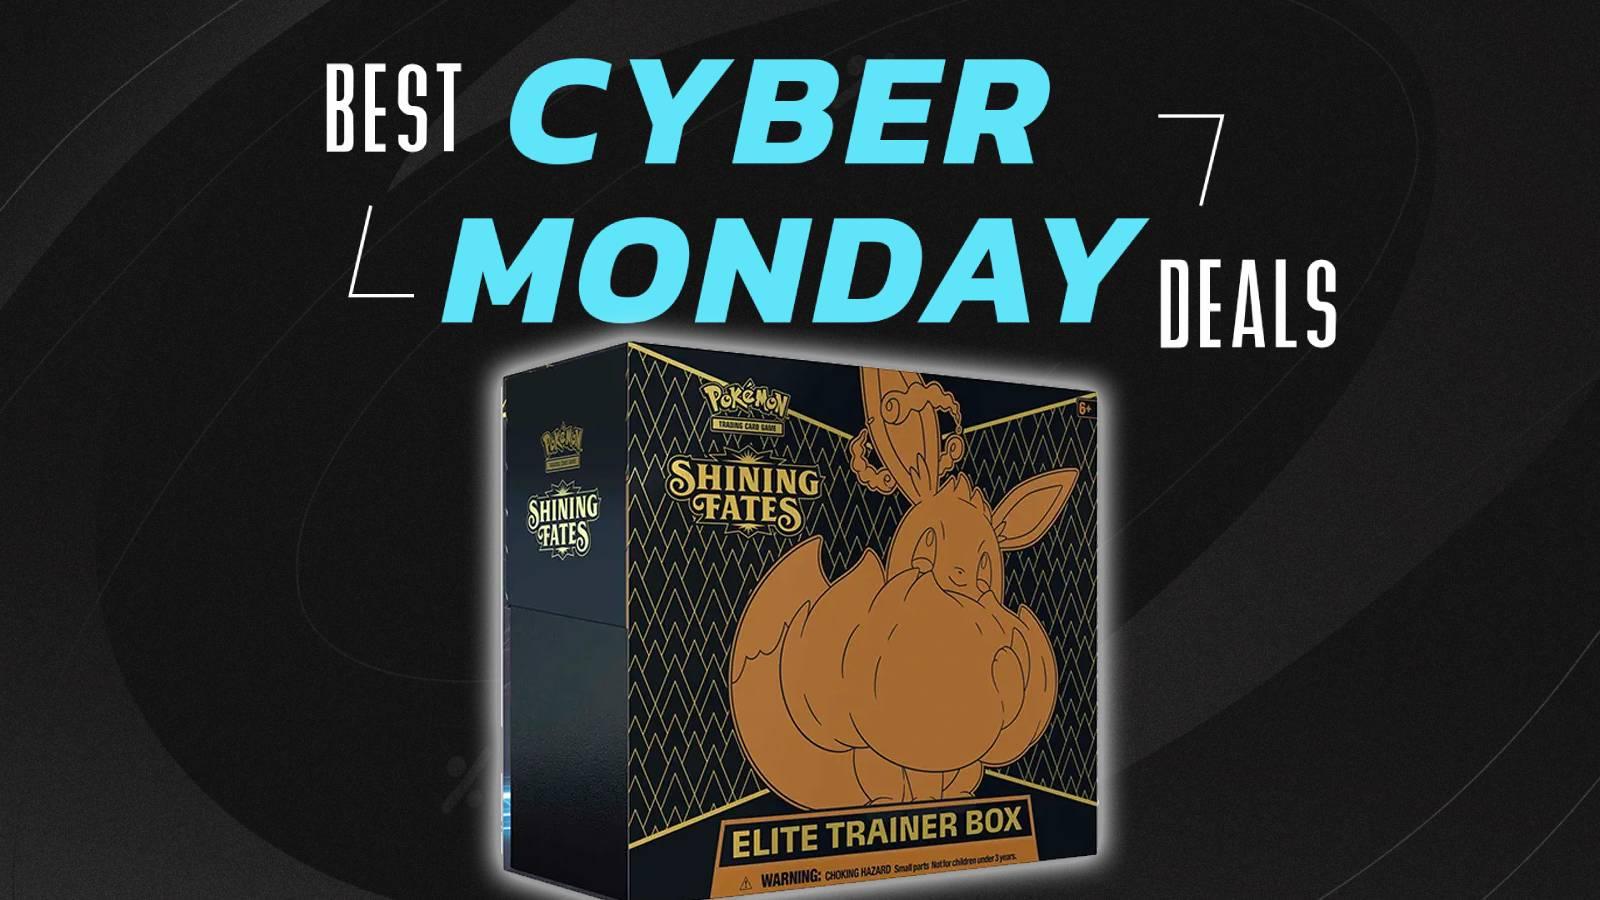 The Pokemon TCG Shining Fates Elite Trainer Box is visible below text reading Best Cyber Monday Deals